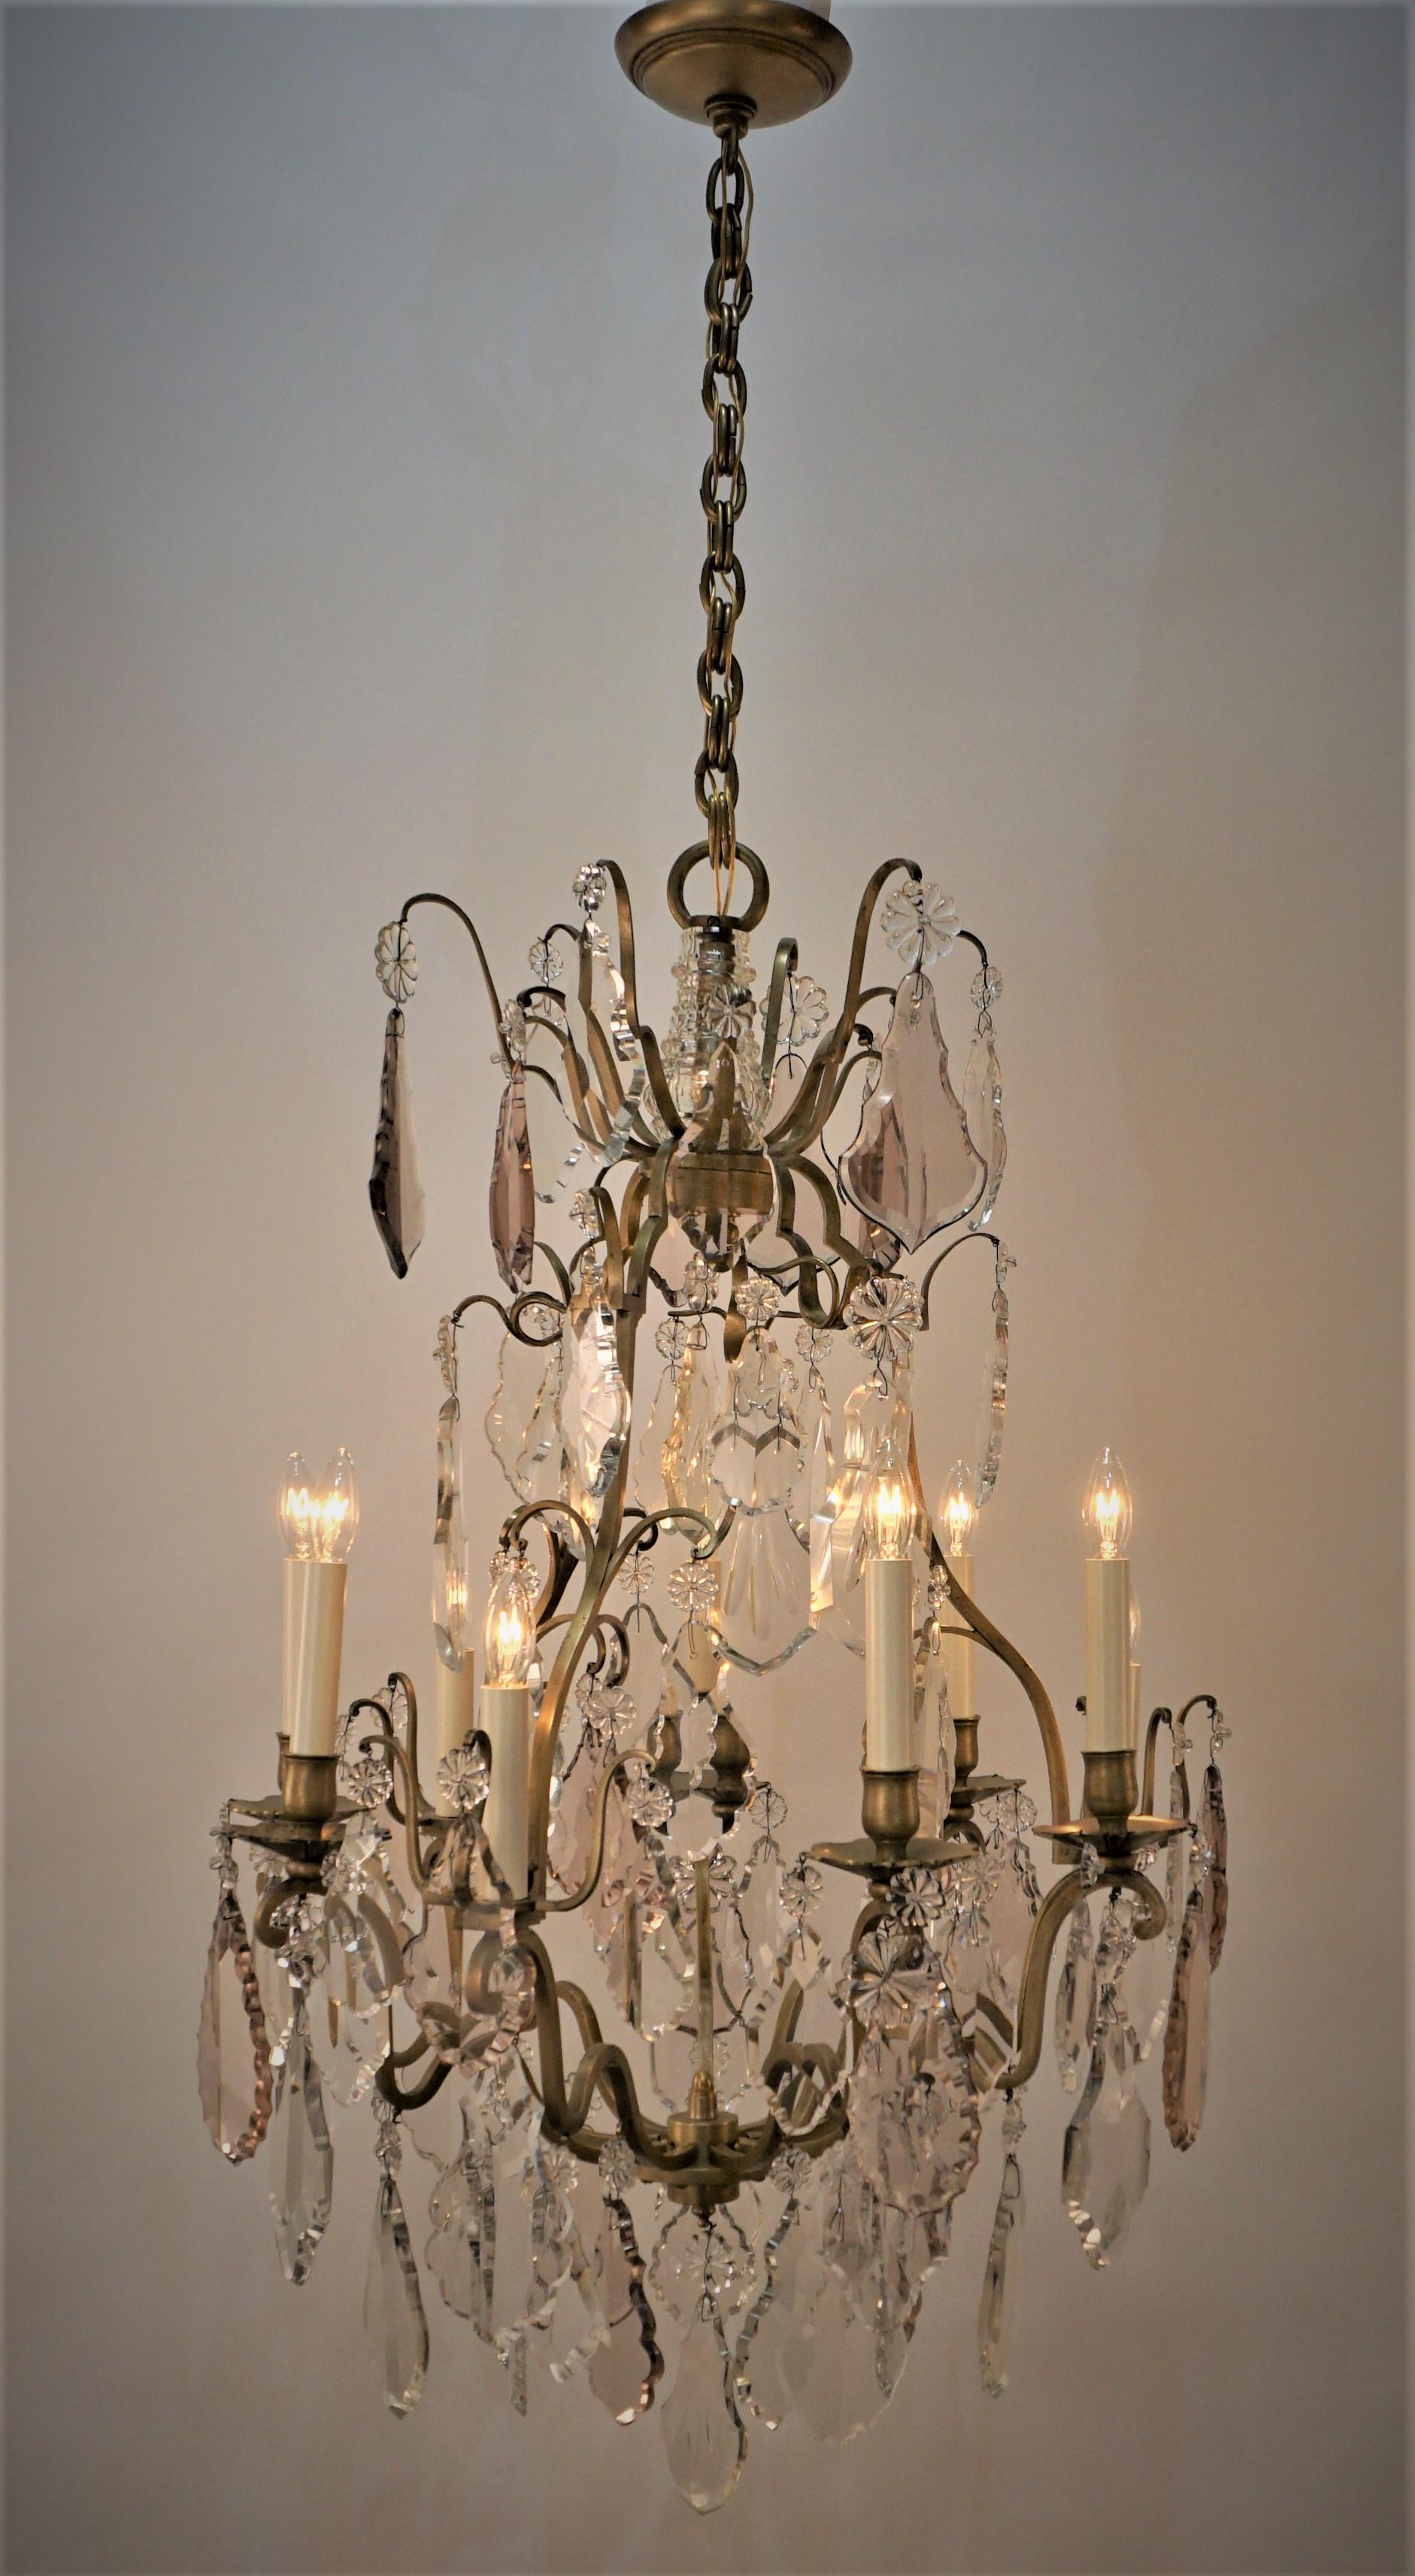 Elegant nine light hand polished clear, light smoked pink crystal and bronze chandelier.
60 Watts max each light.
Measures: 22